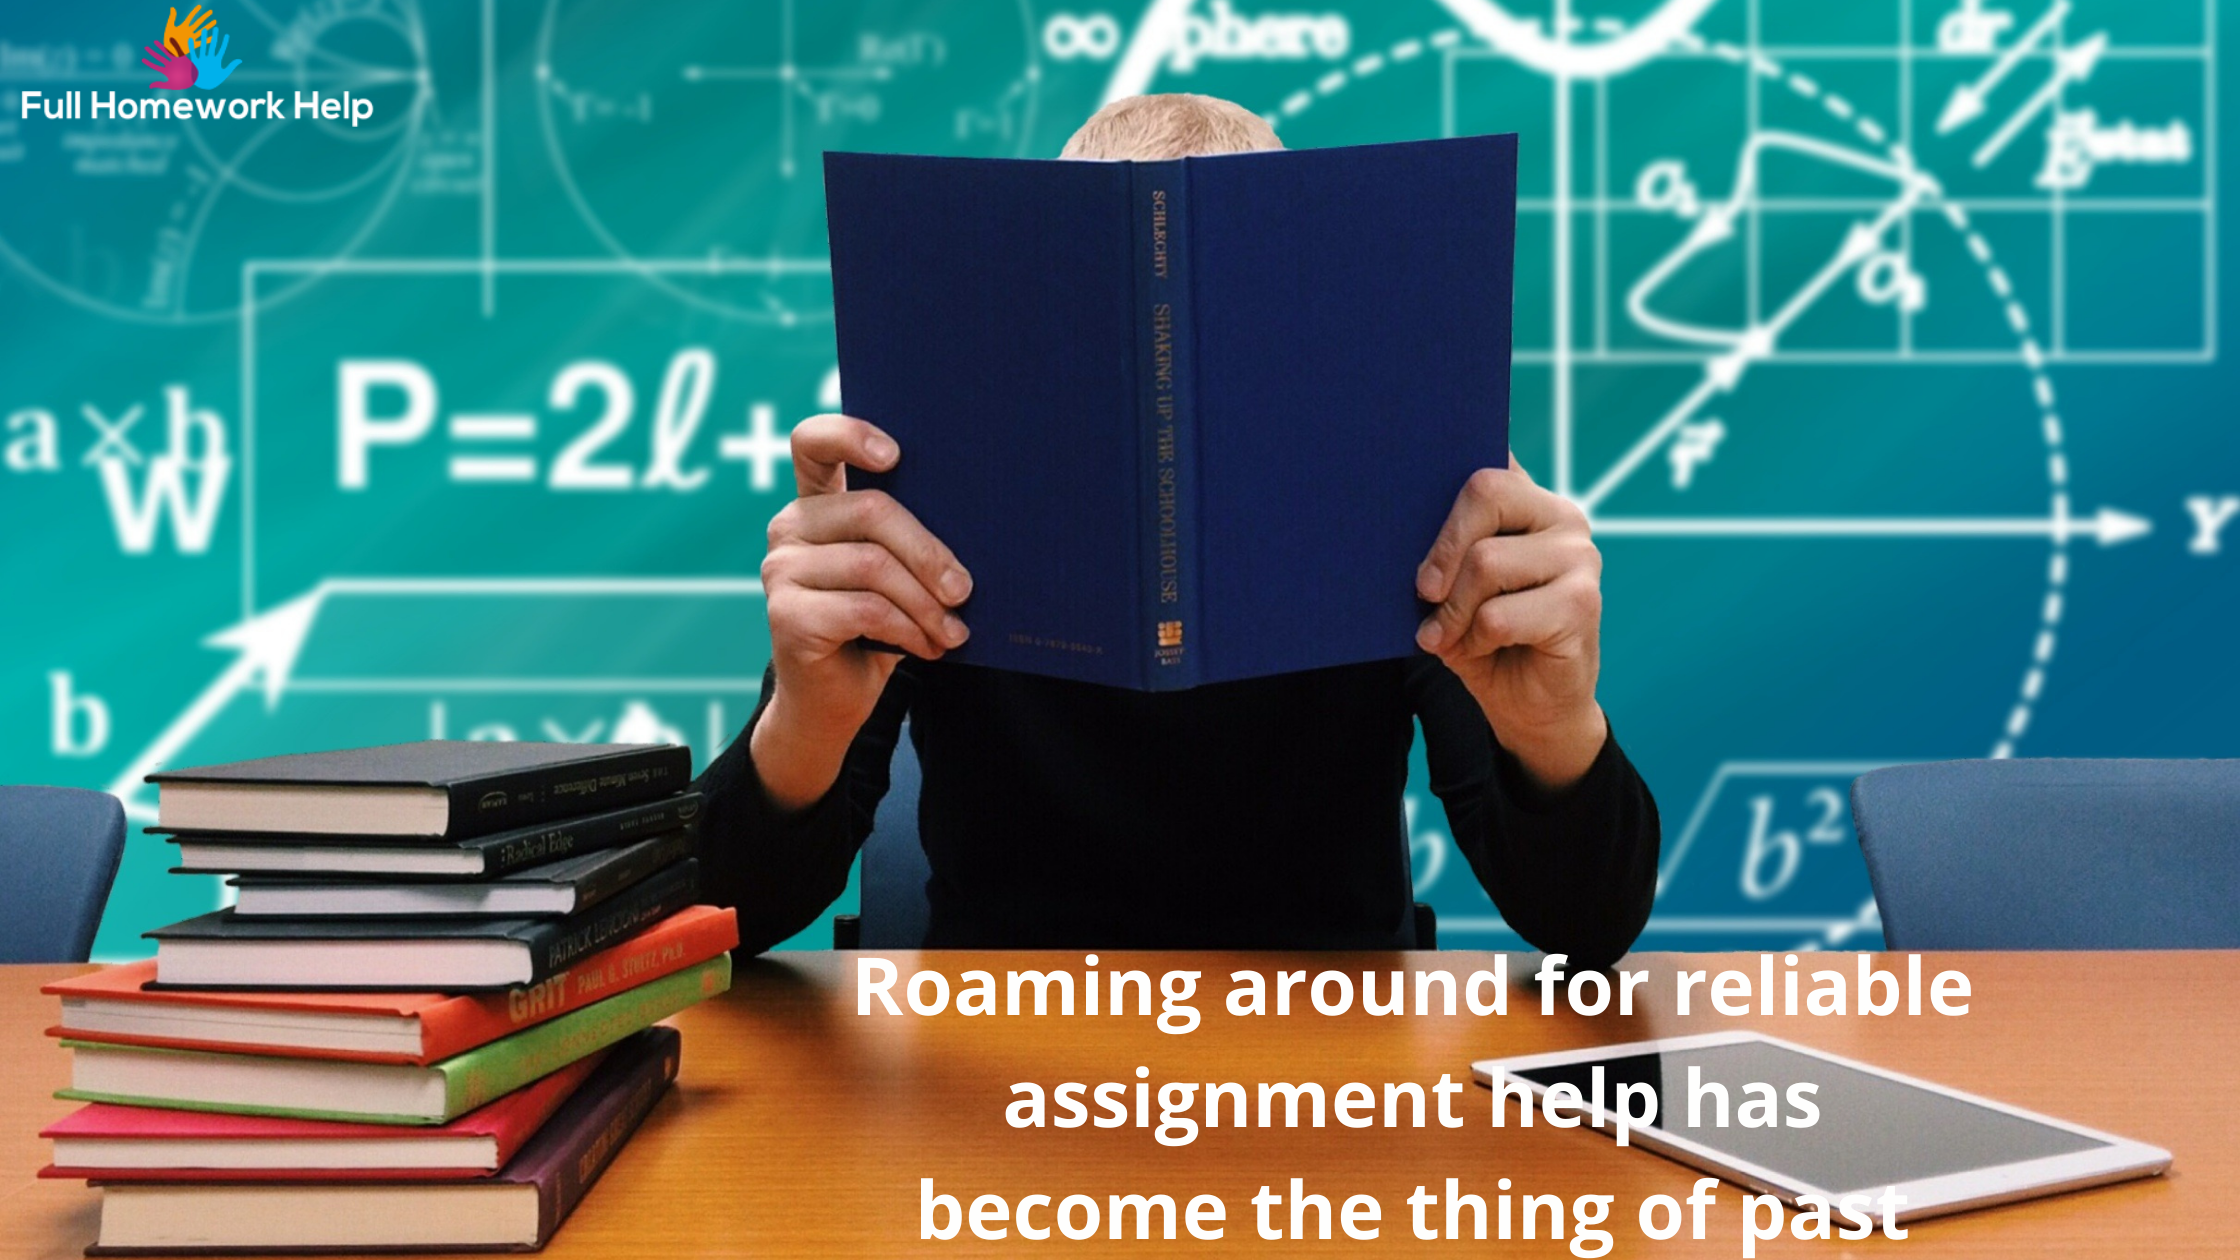 Roaming around for reliable assignment help has become the thing of past